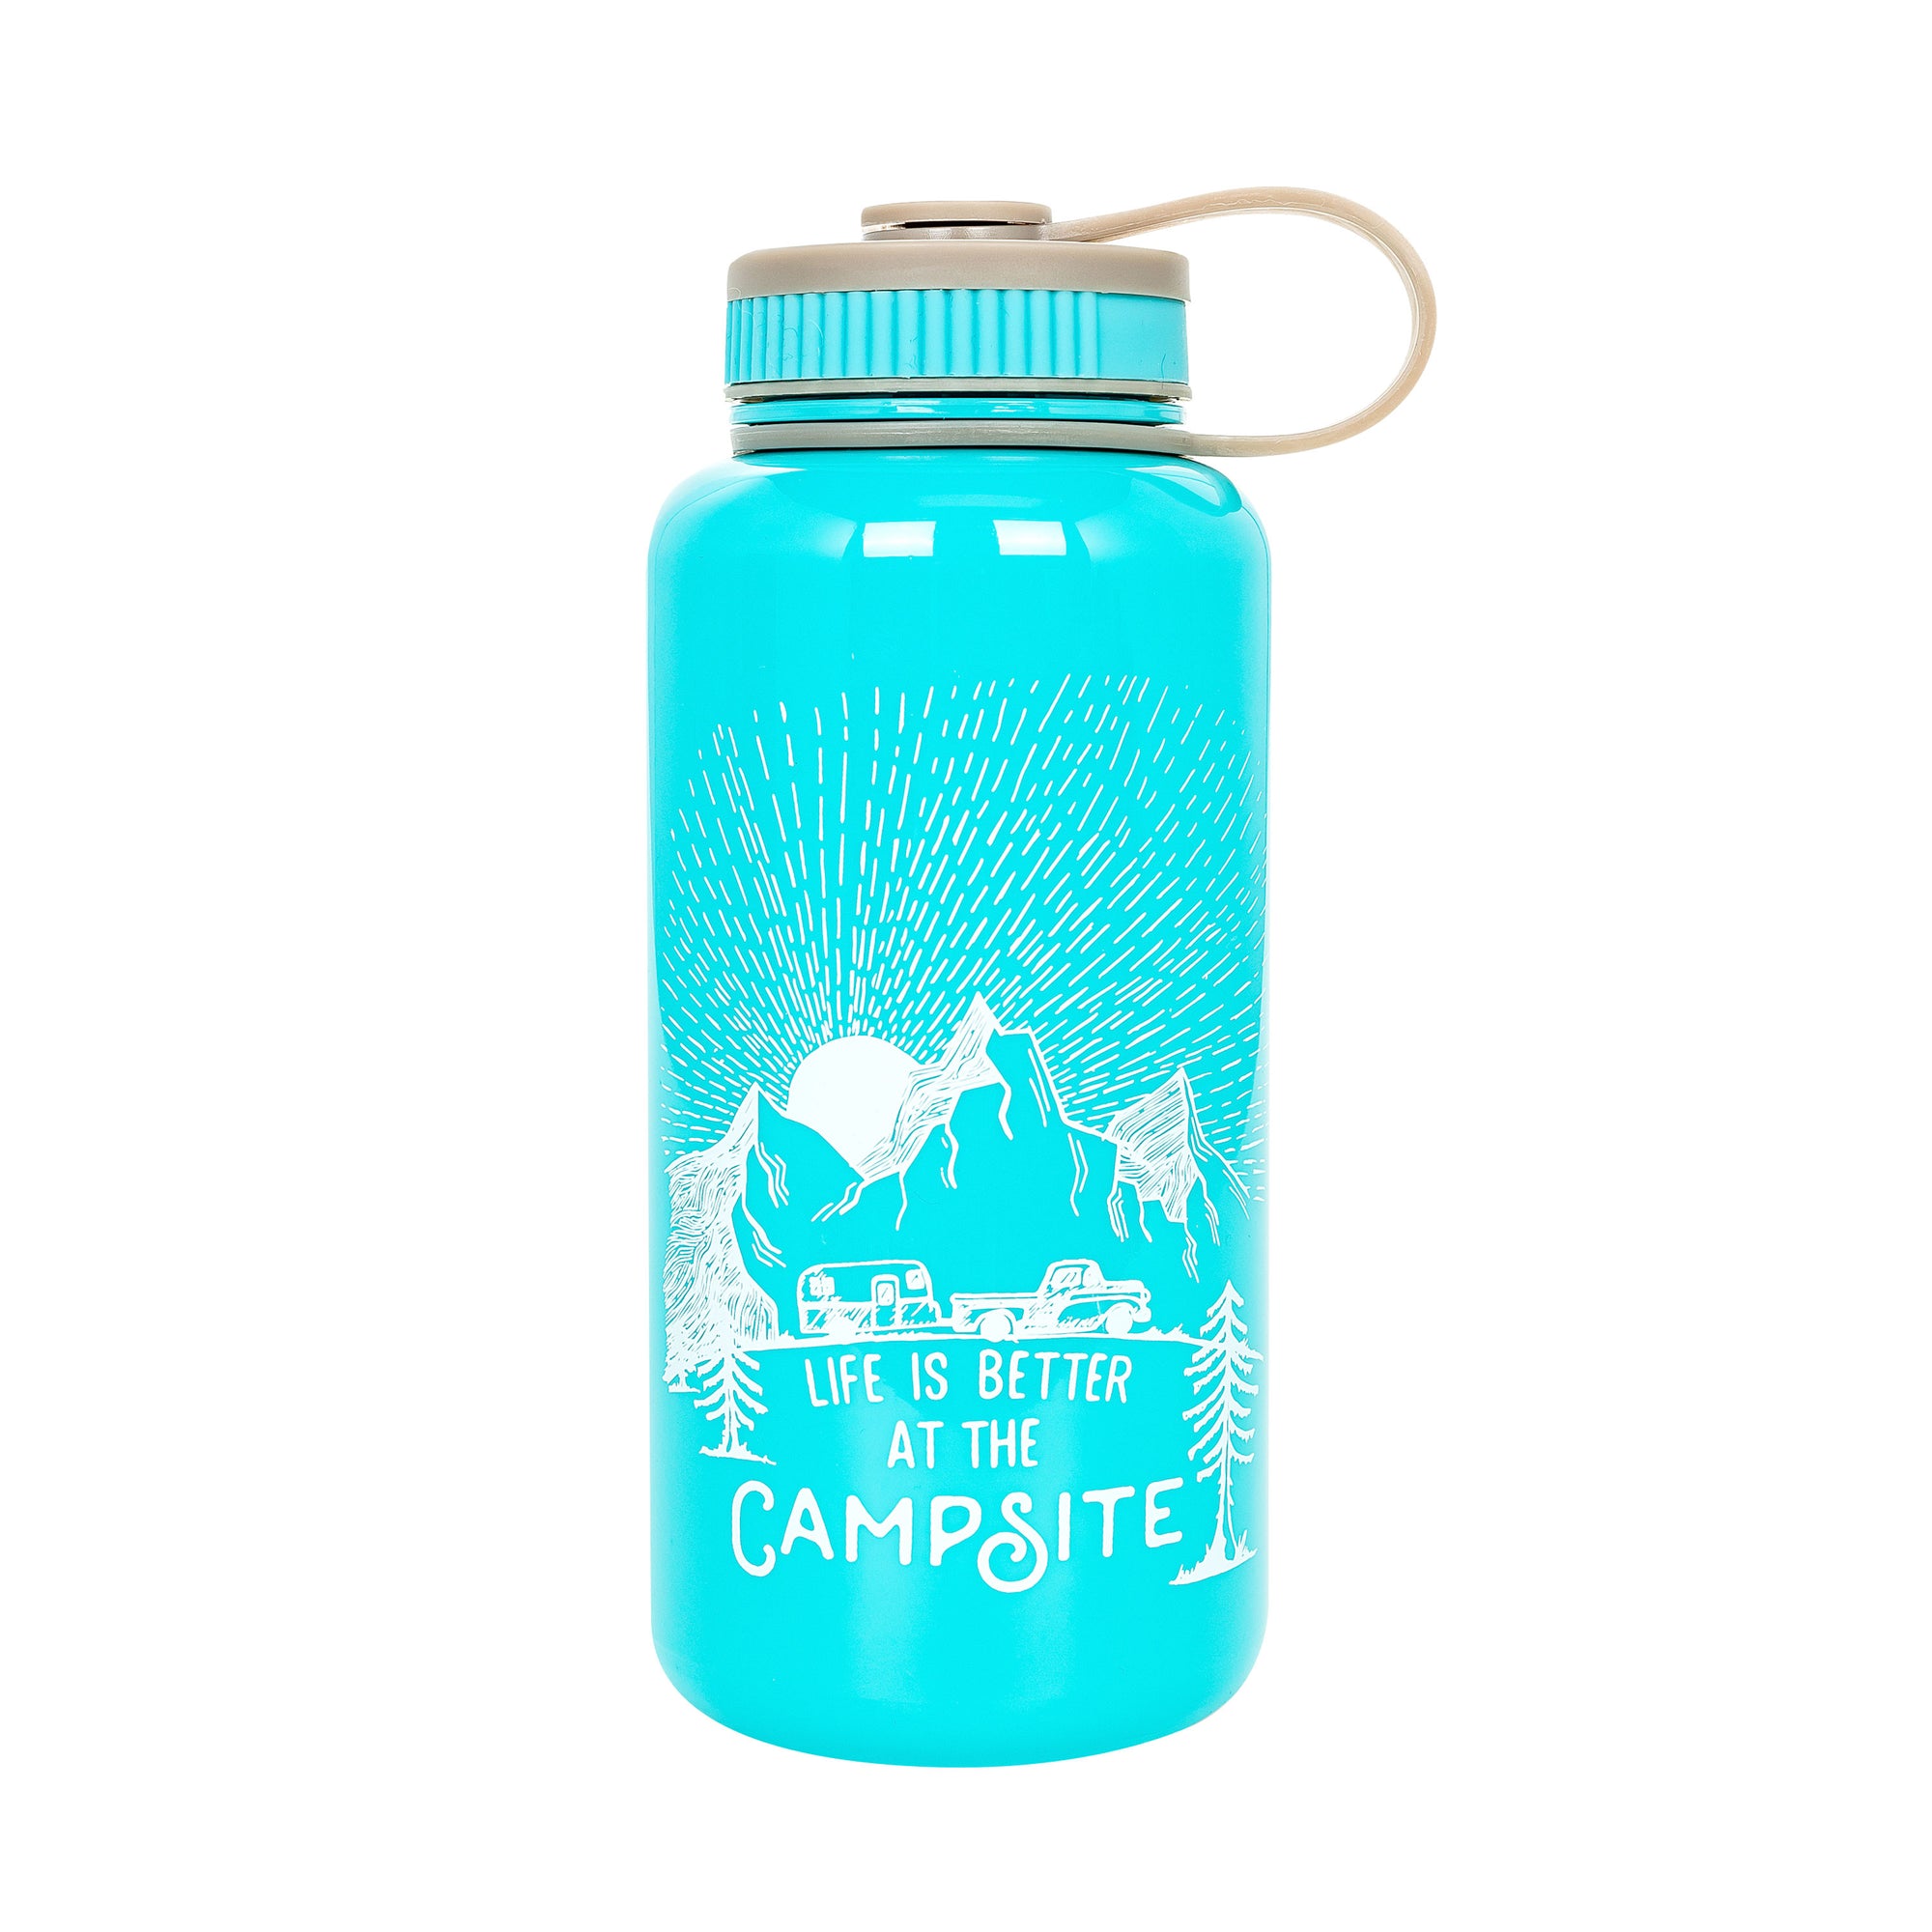 Camco 53270 "Life is Better at the Campsite" Water Bottle - 32 oz.,Teal